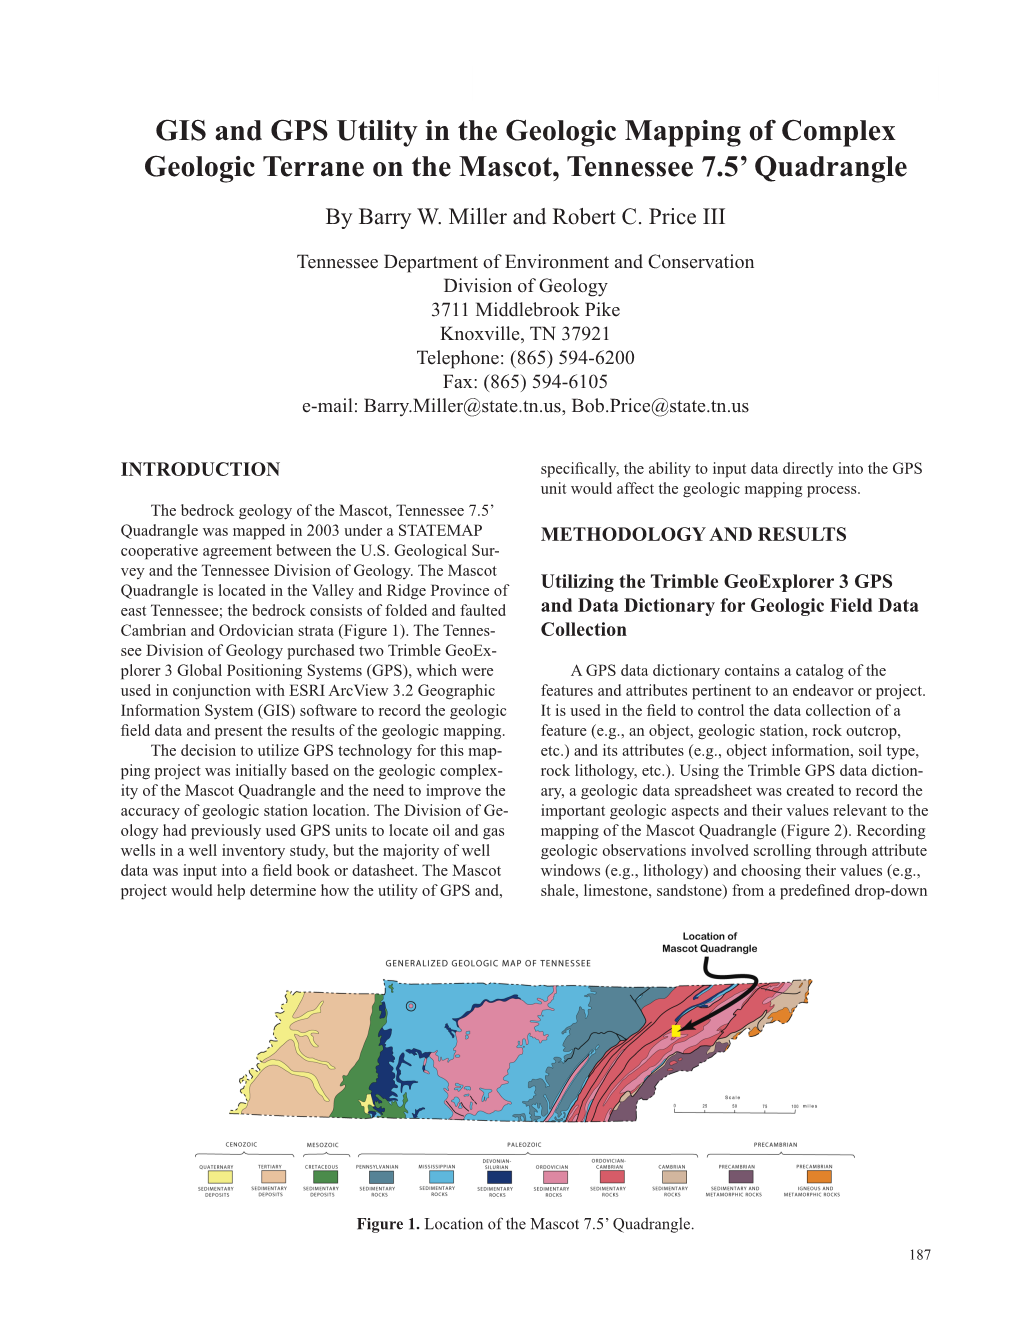 GIS and GPS Utility in the Geologic Mapping of Complex Geologic Terrane on the Mascot, Tennessee 7.5’ Quadrangle by Barry W